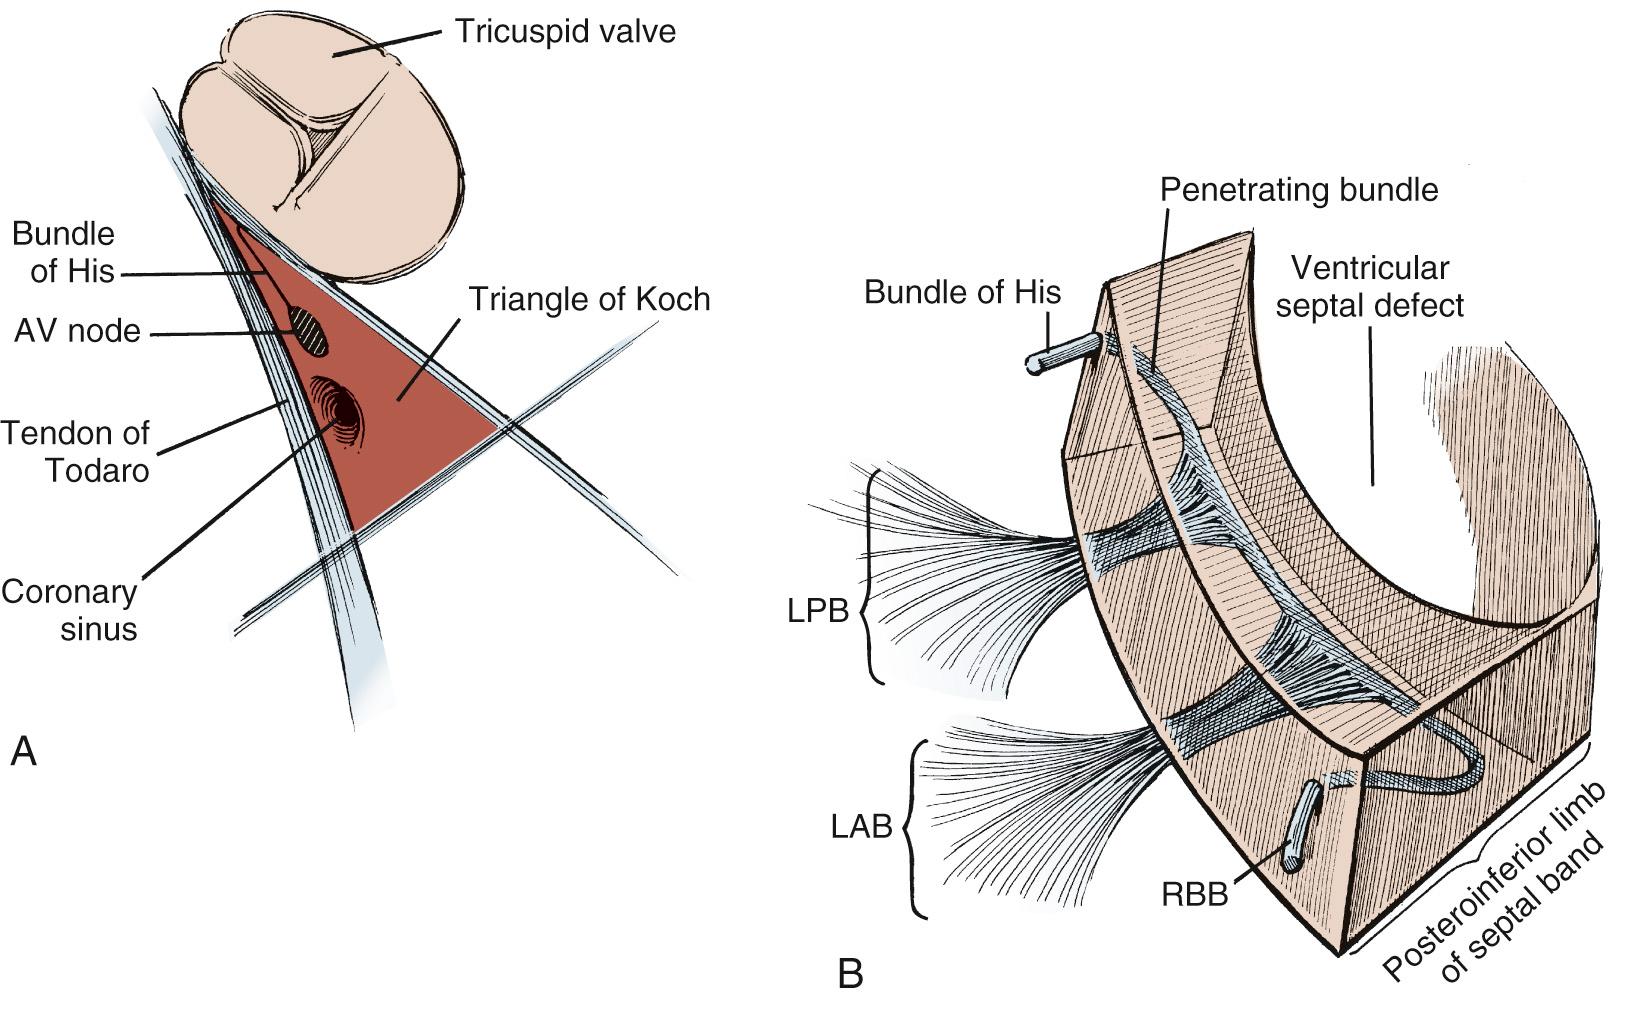 FIGURE 117-2, Schematic representation of the conduction system. A, The atrioventricular (AV) node lies embedded within the triangle of Koch, close to the orifice of the coronary sinus and between the annulus of the tricuspid valve and the tendon of Todaro. The bundle of His originates from the AV node, extends toward the commissure between the septal and anterior leaflets of the tricuspid valve, and penetrates along the posteroinferior margin of the membranous septum and across the muscular ventricular septum. B, The bundle of His gives rise to the left posterior branch (LPB) and the left anterior branch (LAB). The right bundle branch (RBB) then travels back along the ventricular septum toward the right ventricular septal surface. At the level of the muscle of Lancisi, the right bundle branch descends toward the right ventricular apex.